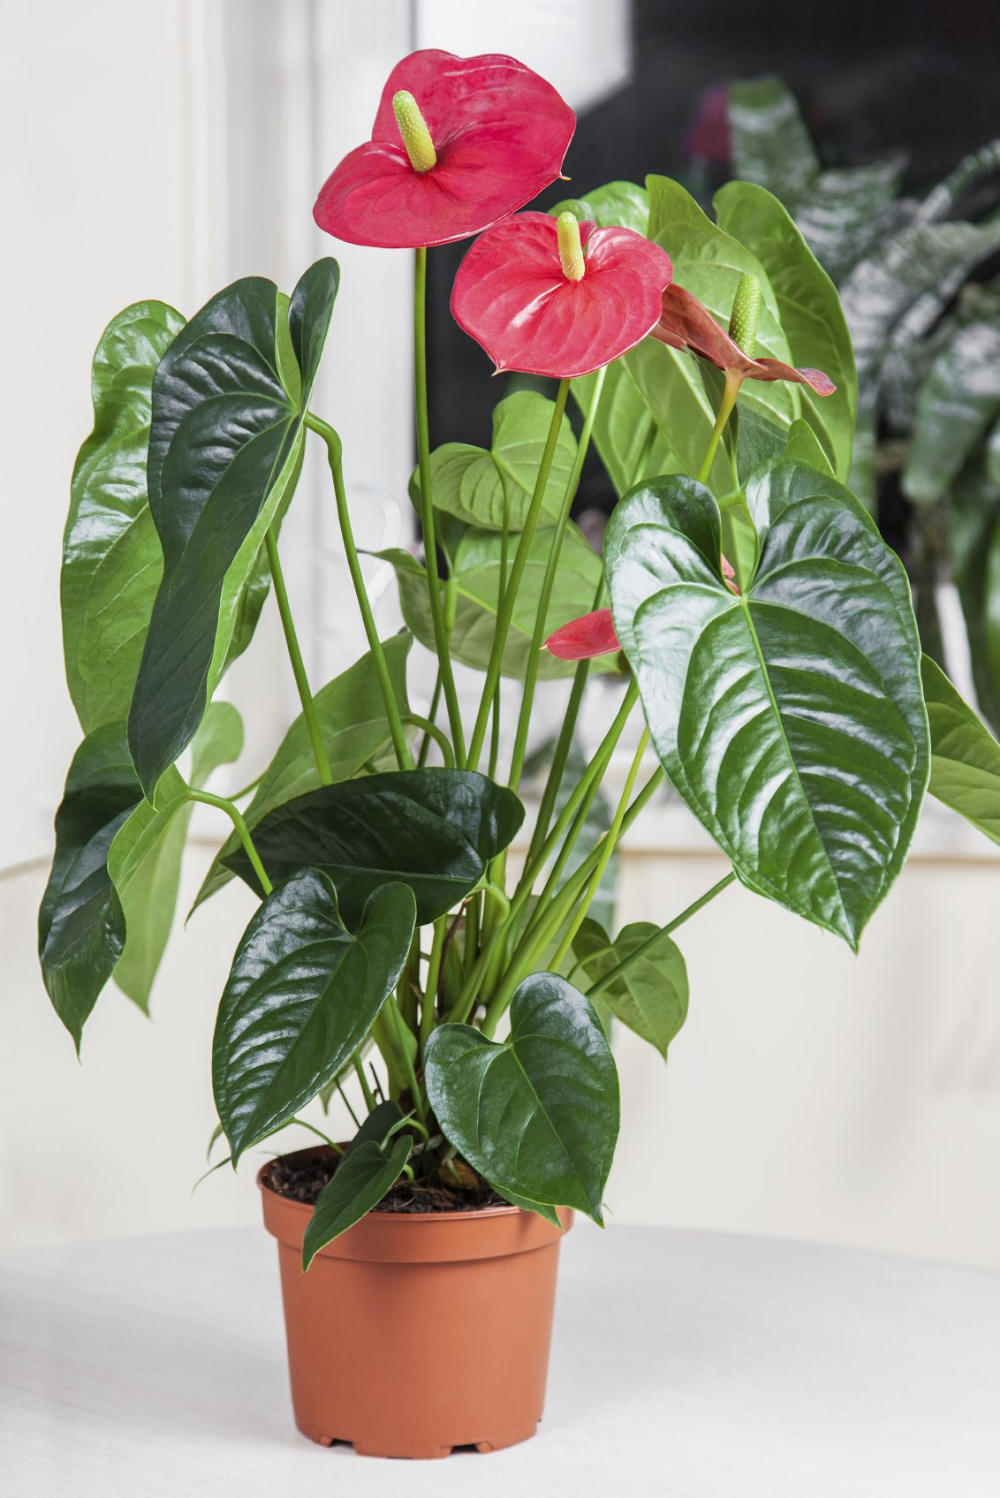 Anthurium Andraeanum: Growing and caring tips of Painter's Palette.